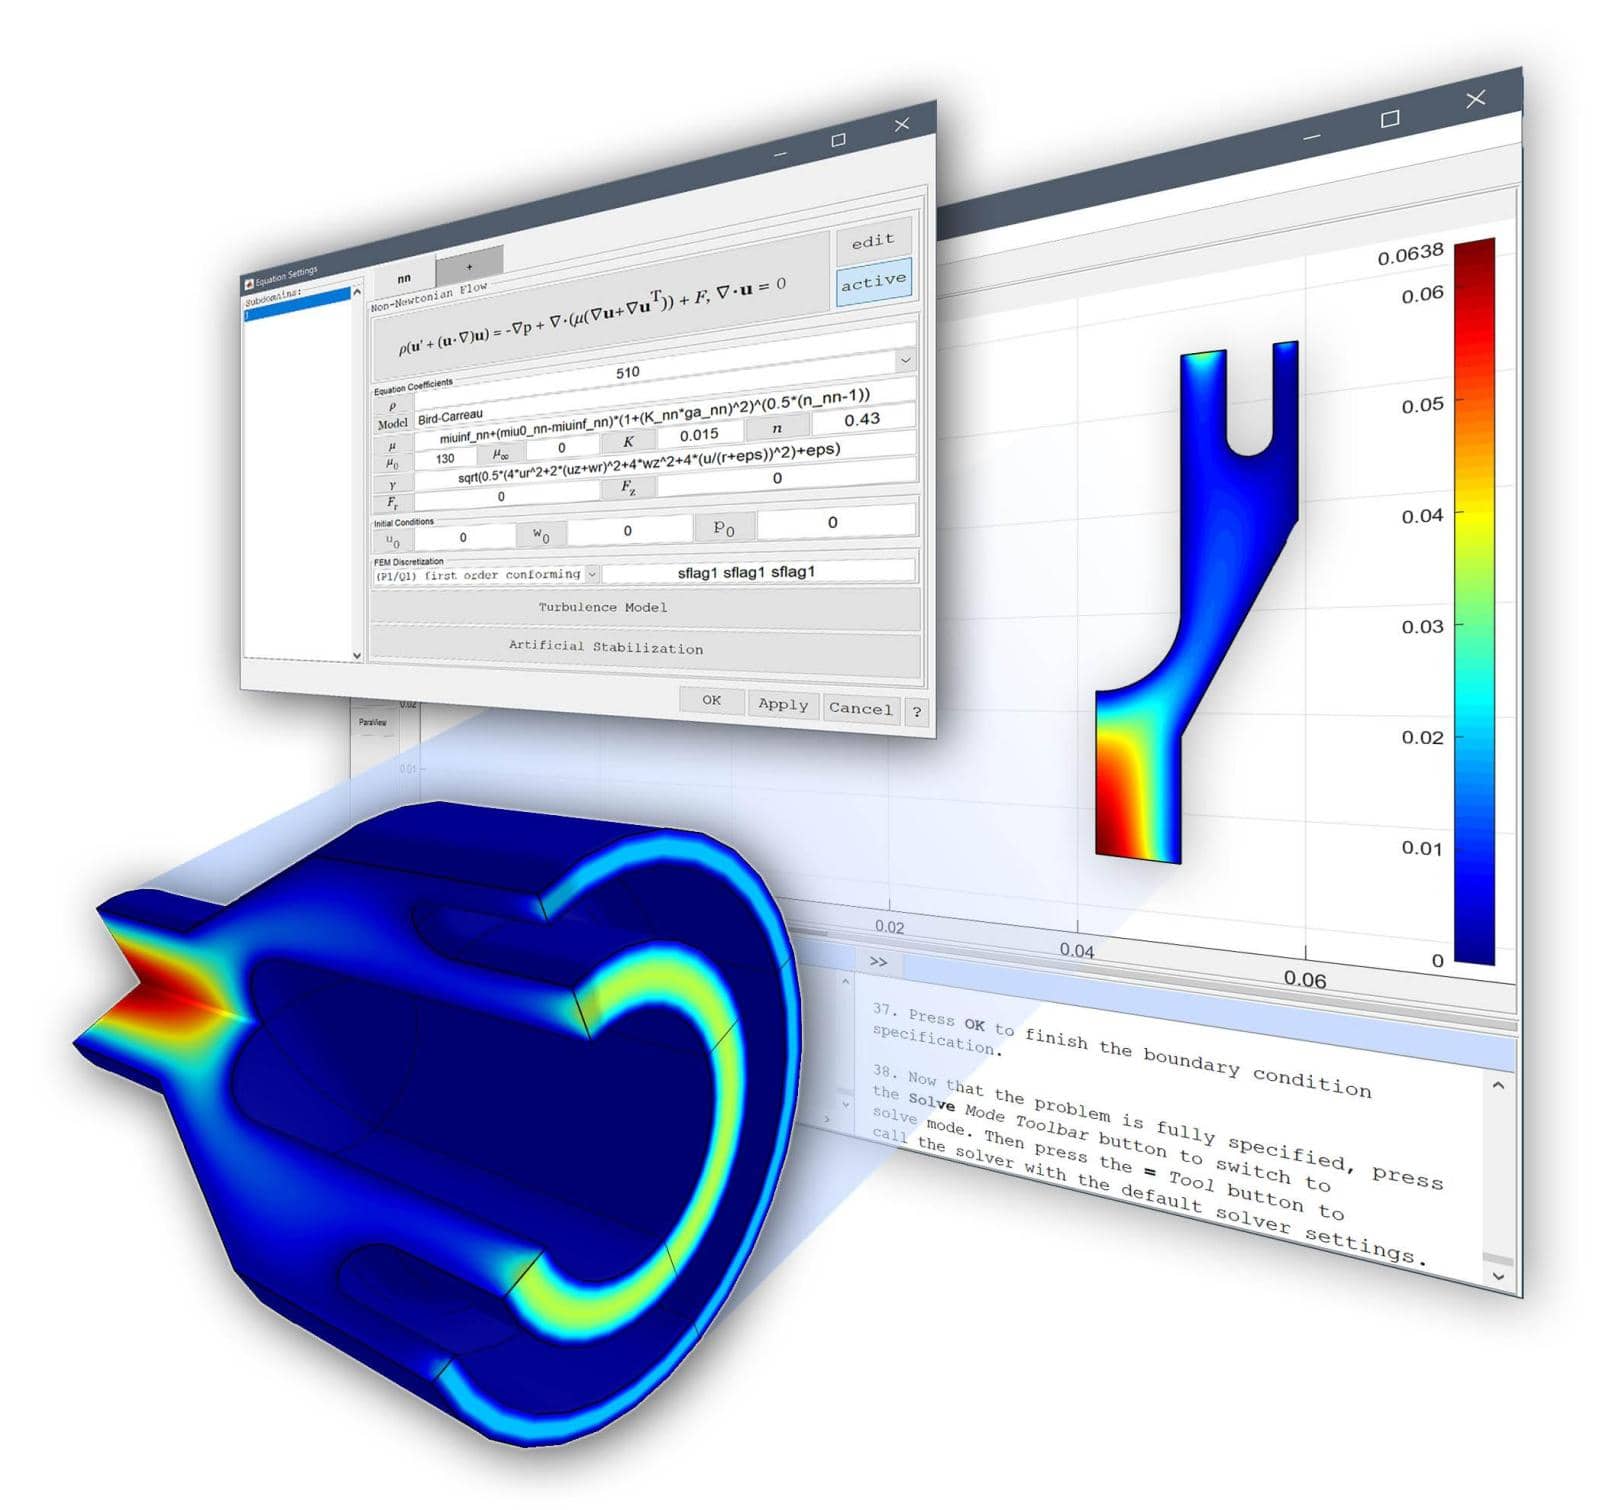 CFD simulations of non-Newtonian fluids with FEATool Multiphysics